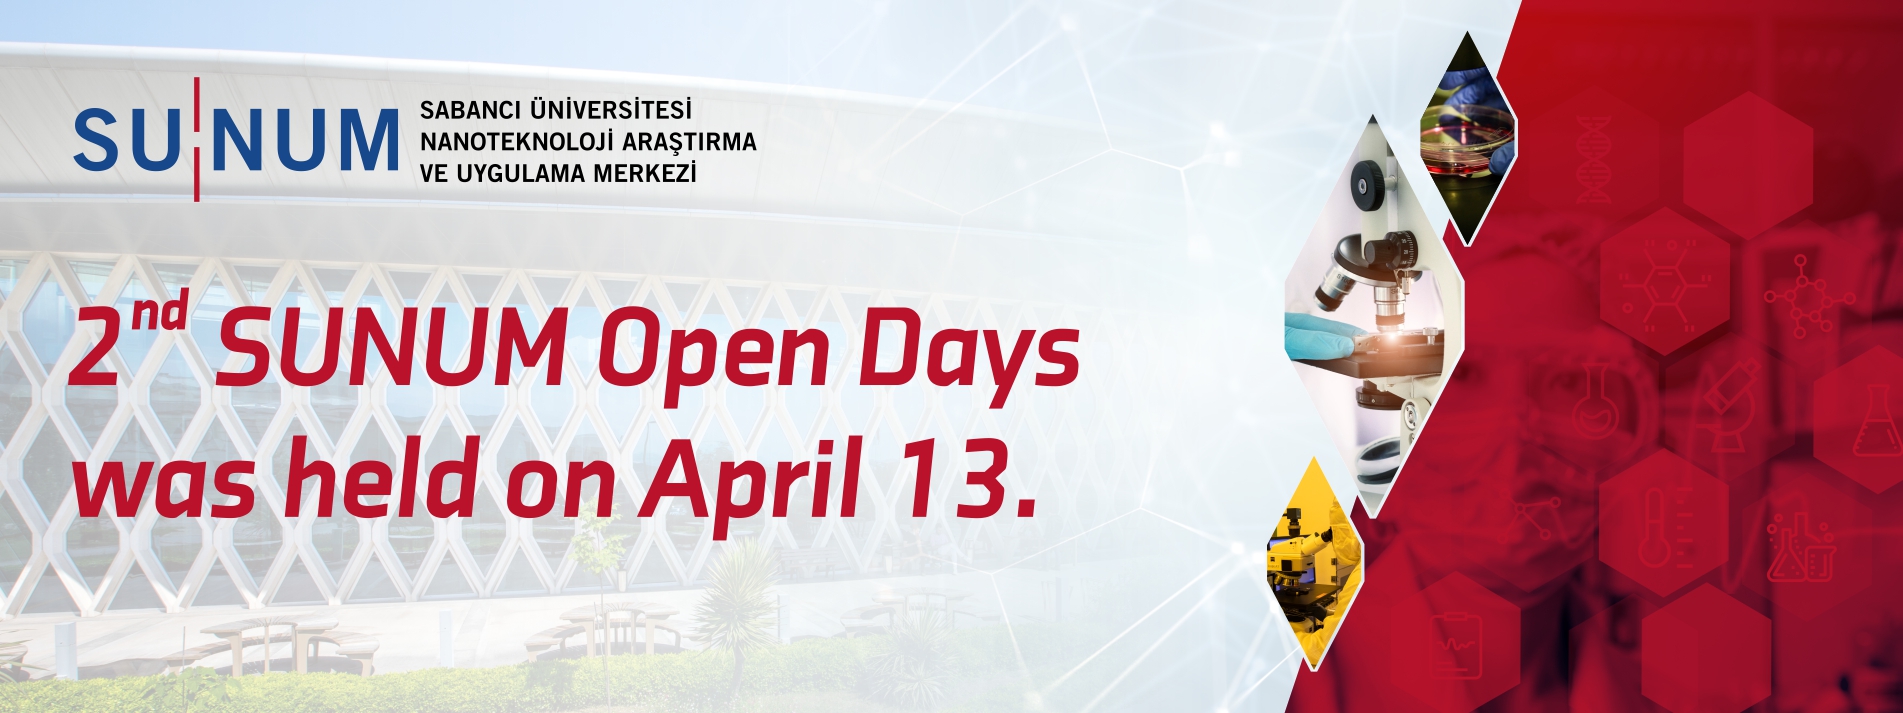 The second of SUNUM Open Days took place on April 13